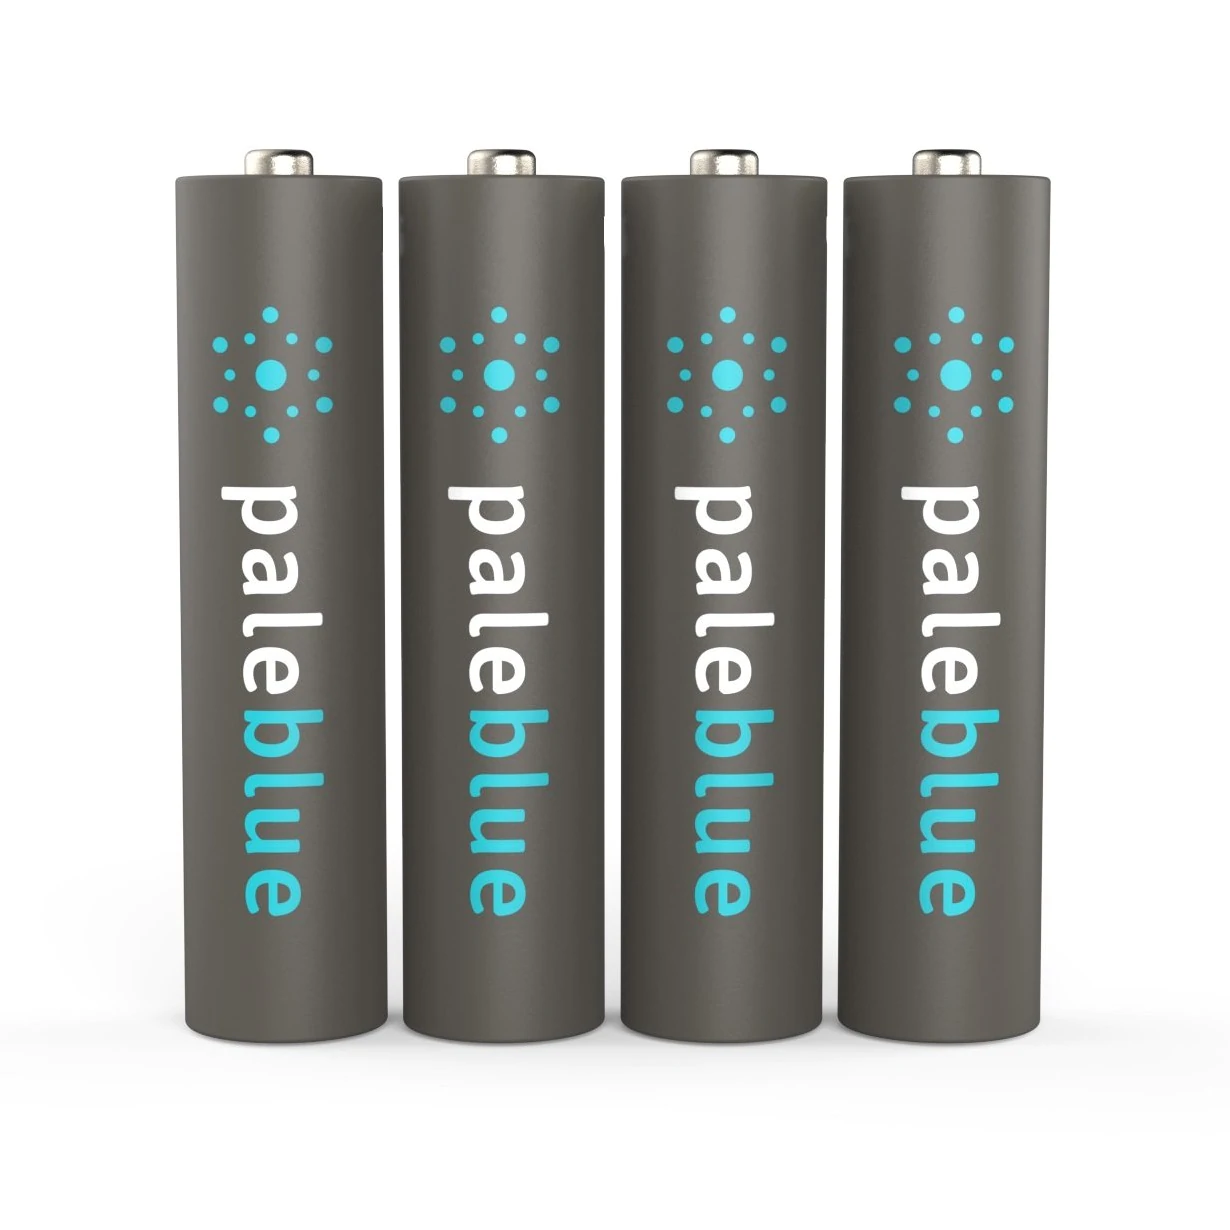 AAA/LR03 USB rechargeable batteries - Solar Brother